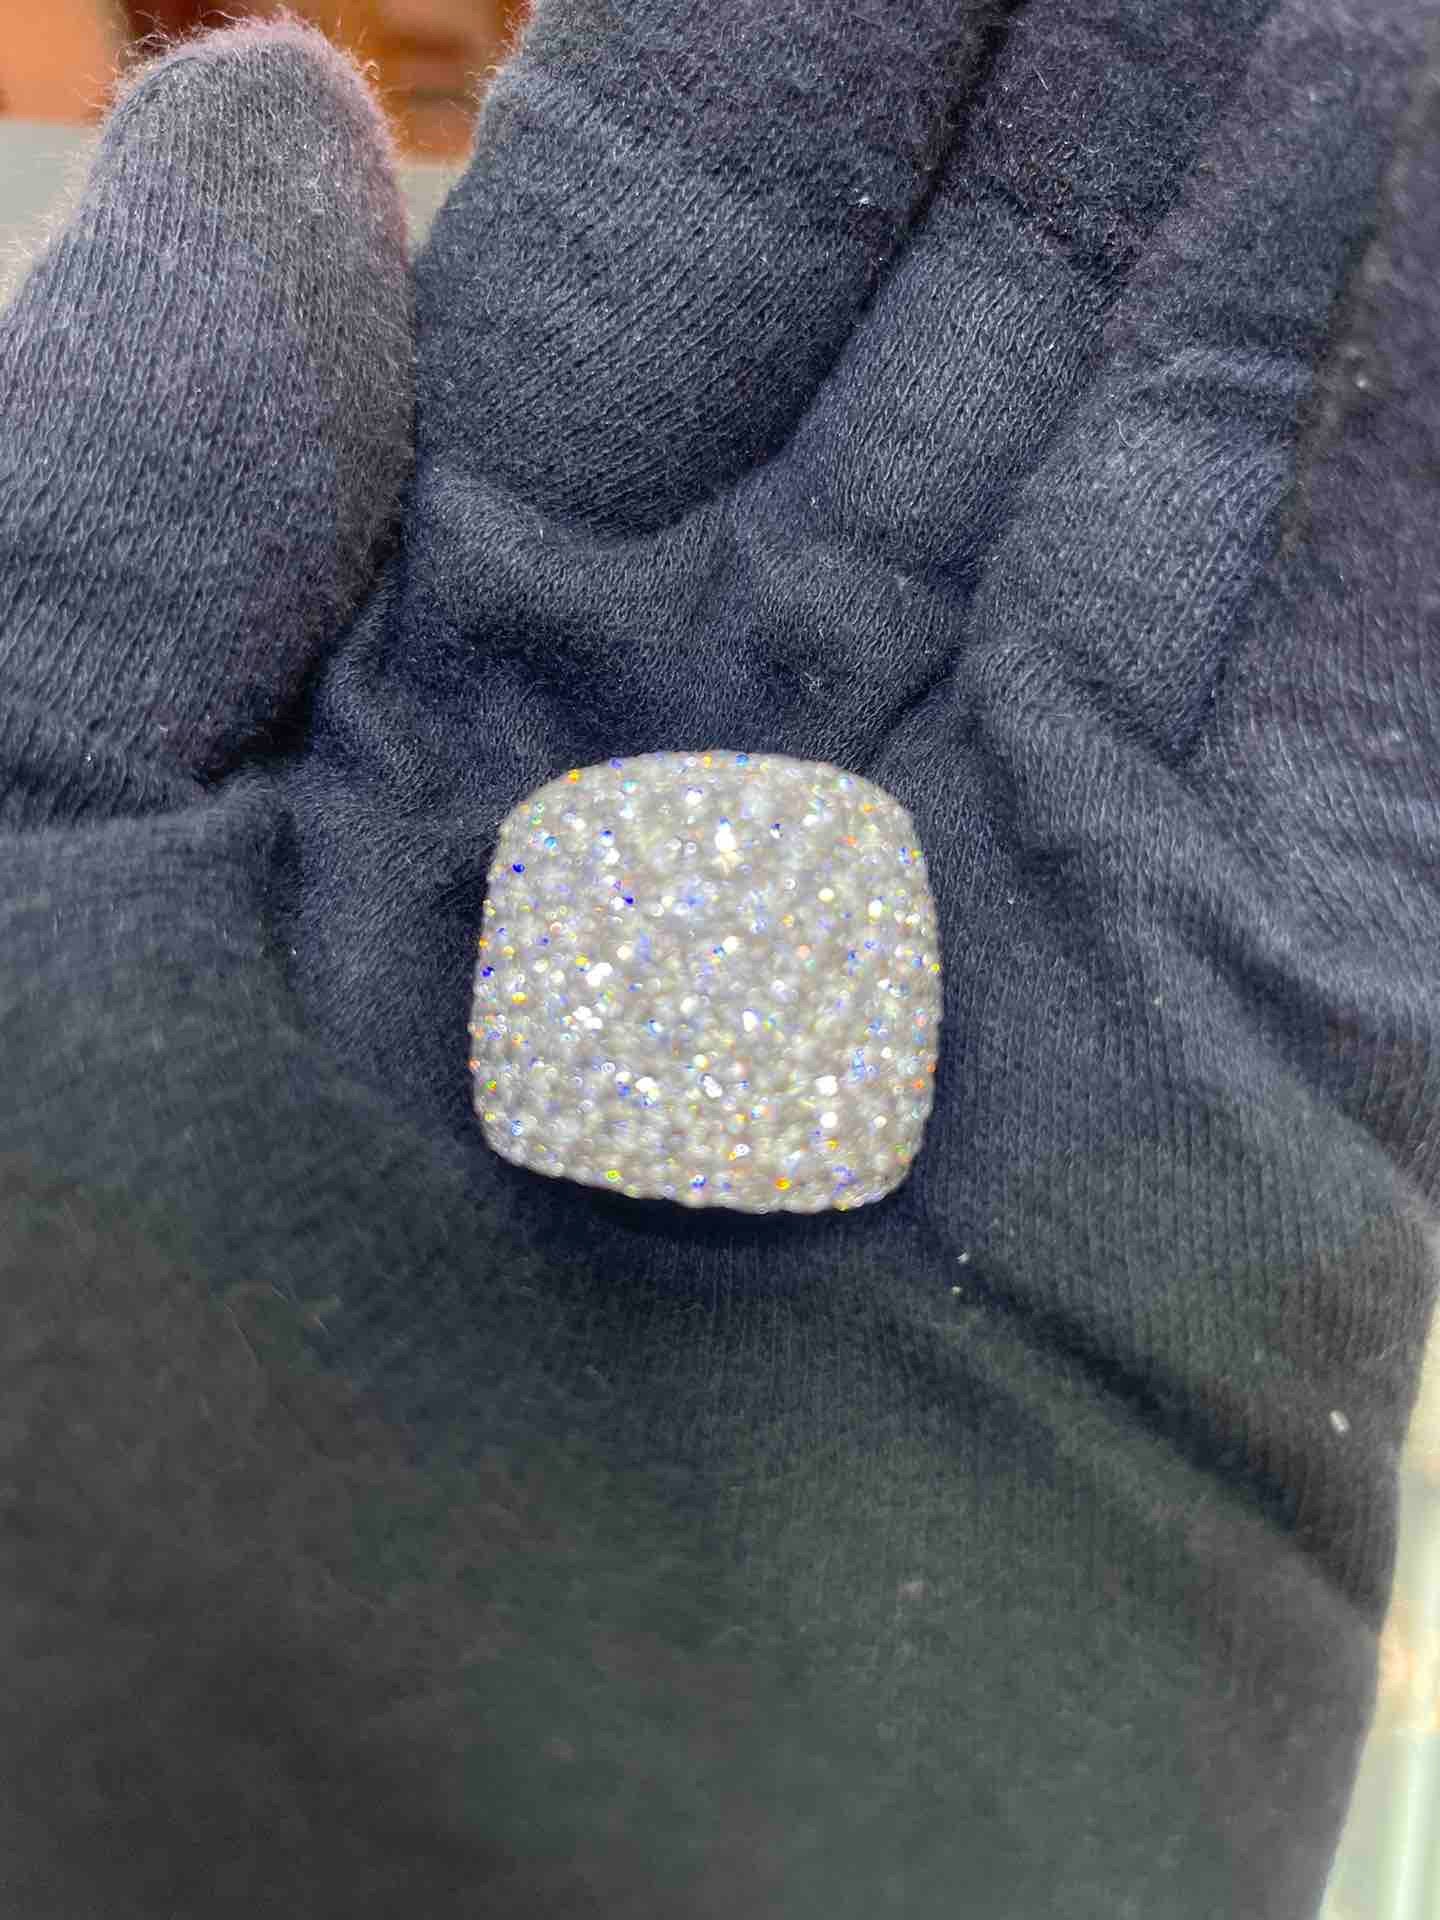 Custom Made VS1 18k 9 ct Ring with all Natural Diamonds and 13 grams of 18k White Gold